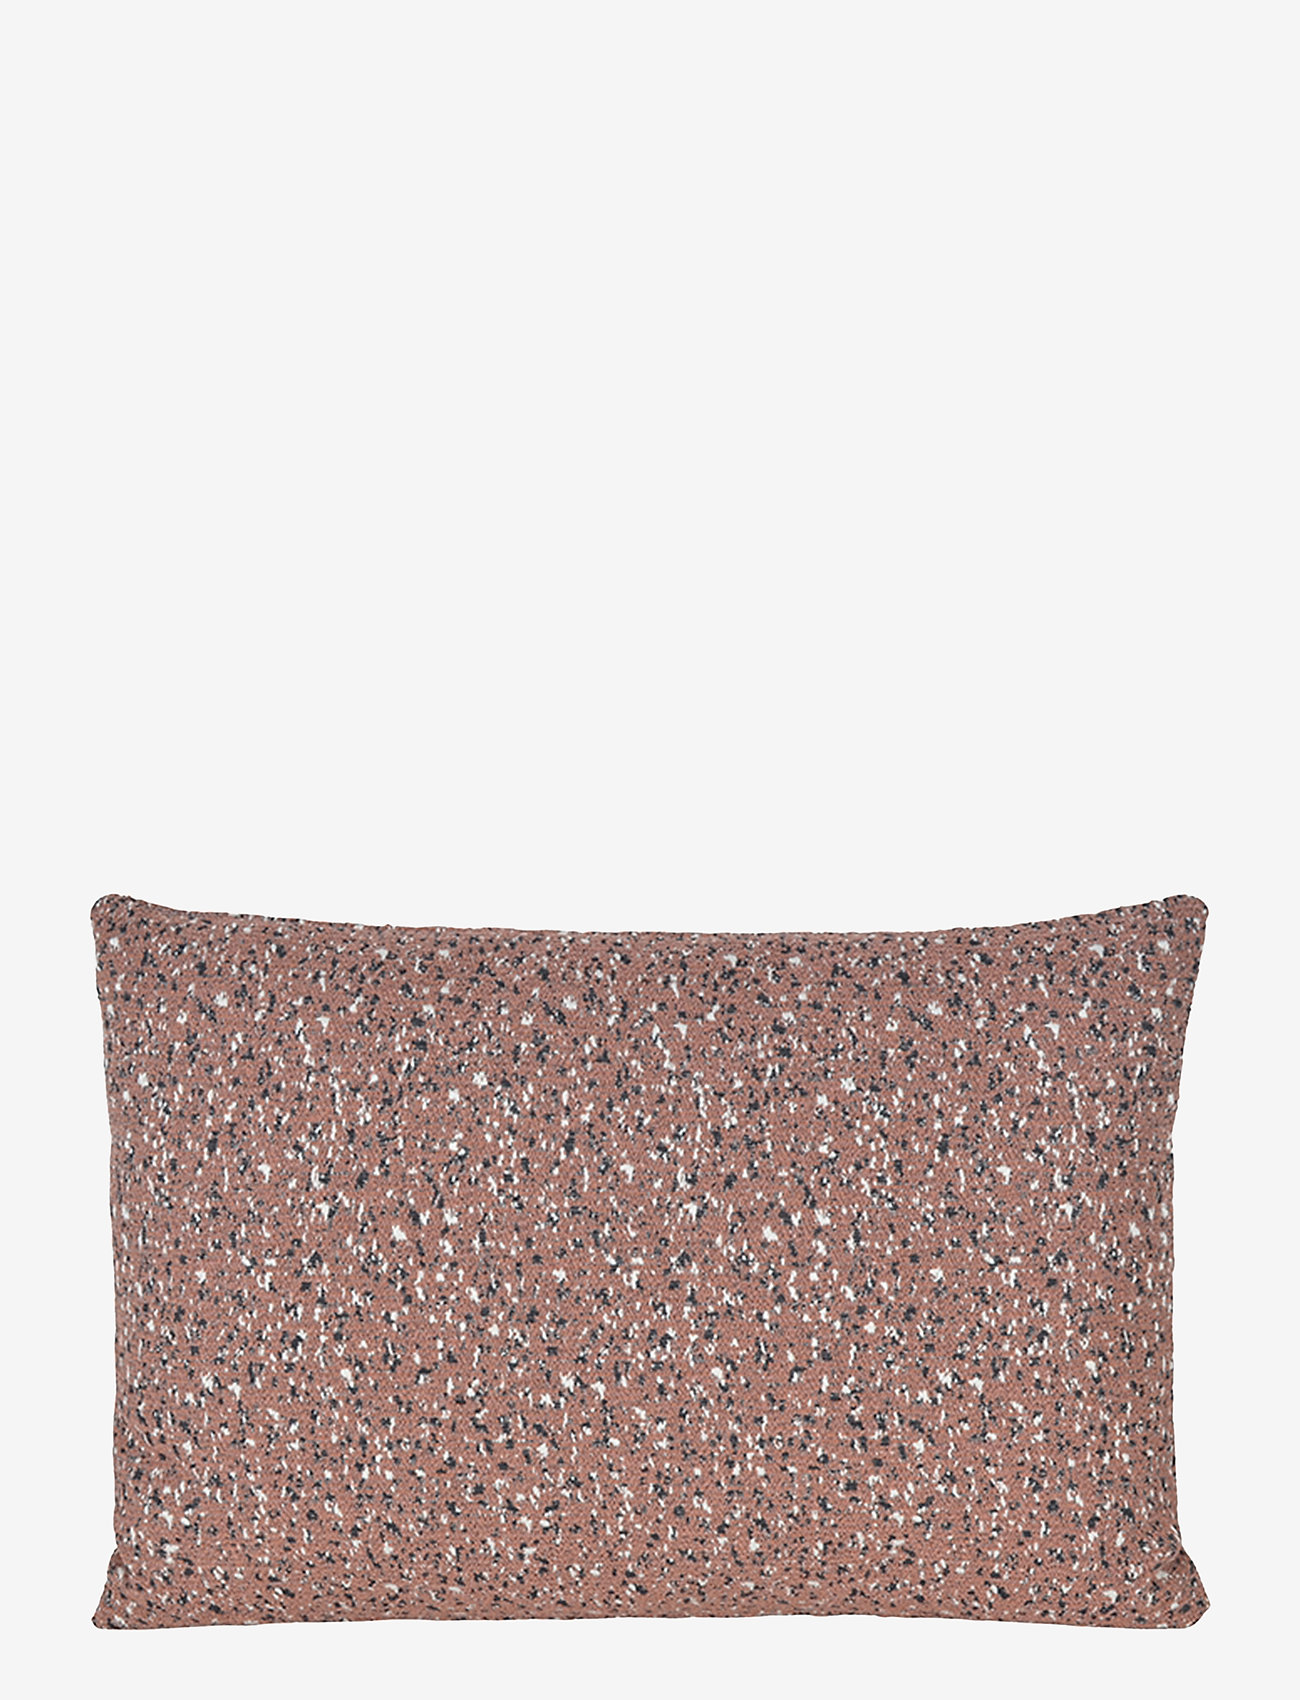 compliments - Terrazzo 40x60 cm - cushions - rose - 0